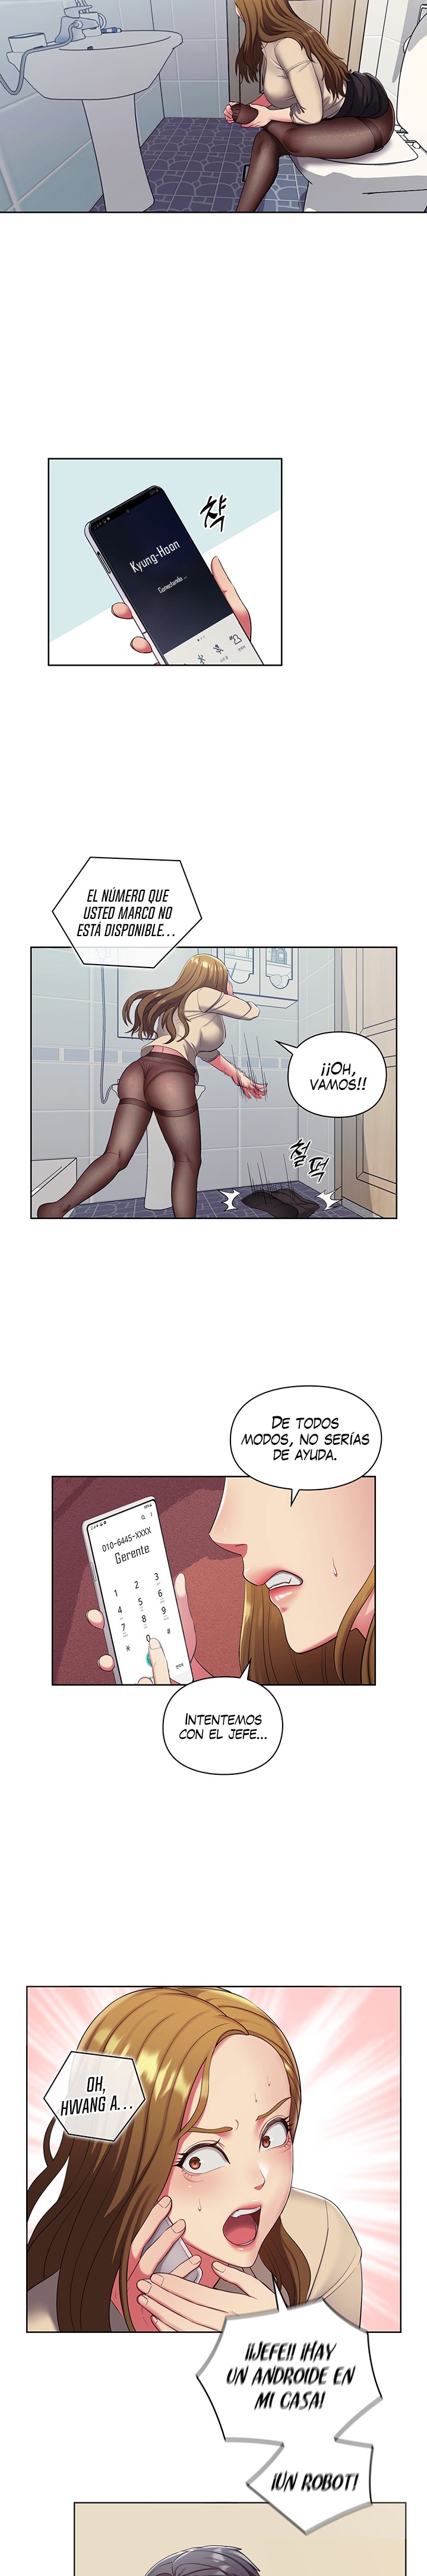 A Housekeeper Raw - Chapter 3 Page 6